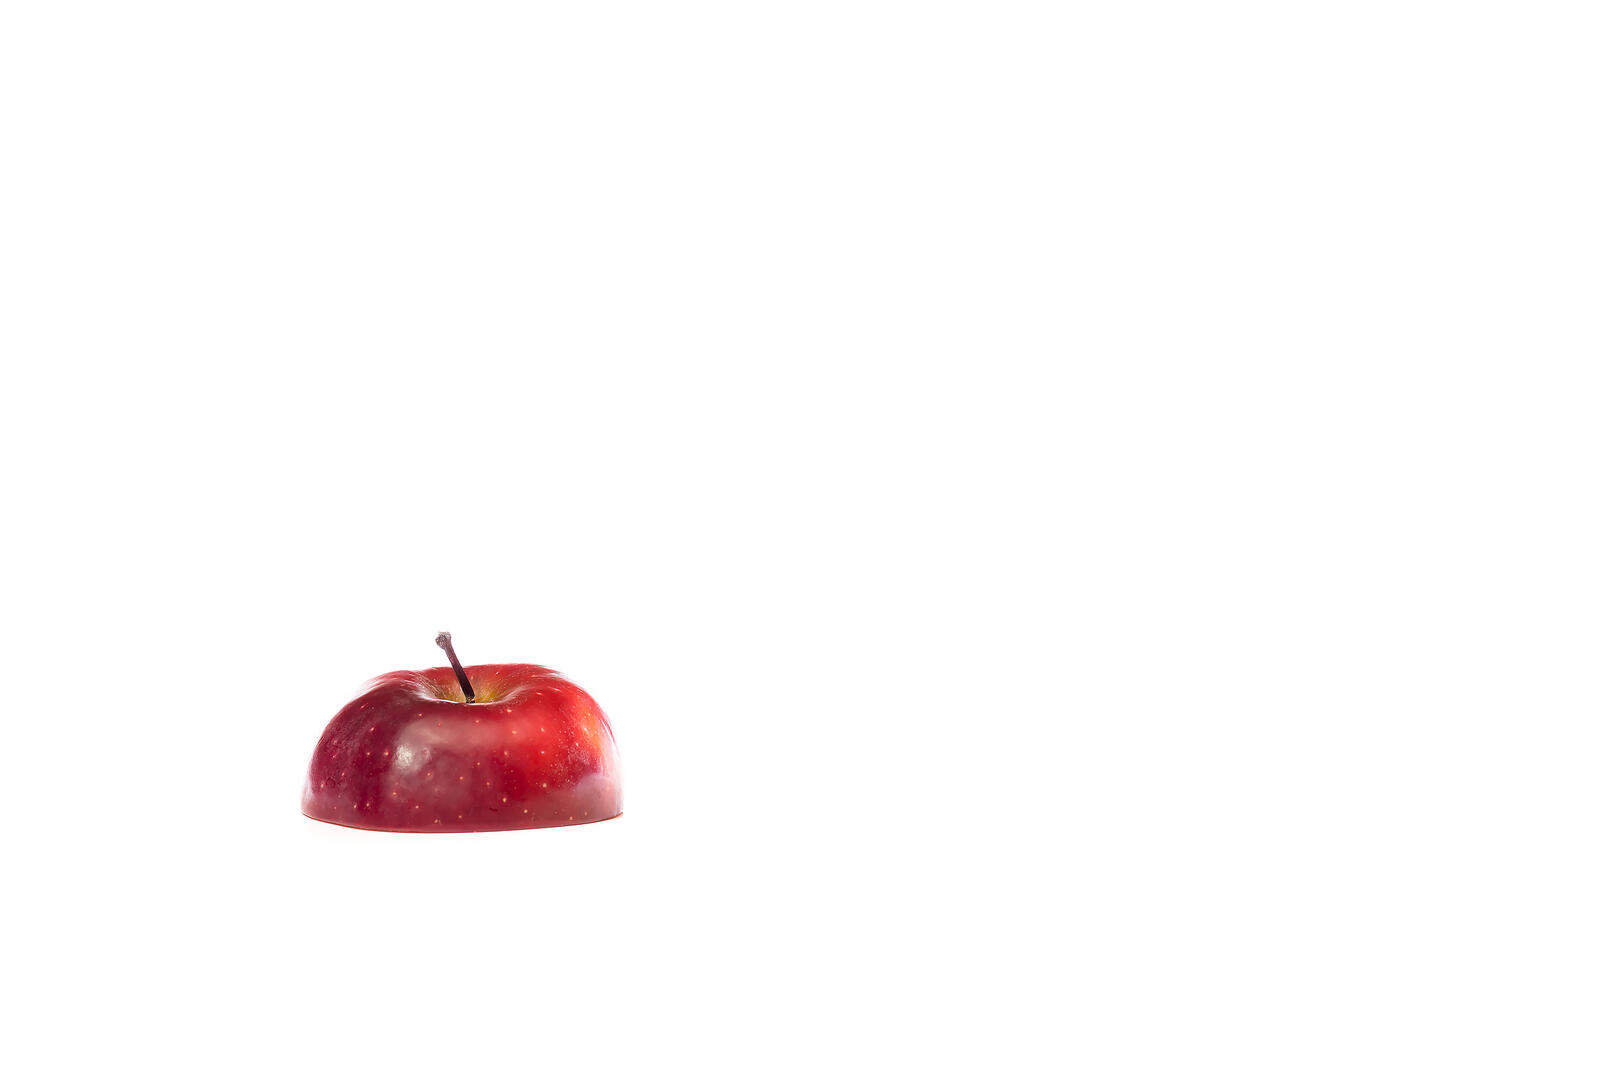 Wallpapers cut white background apple on the desktop